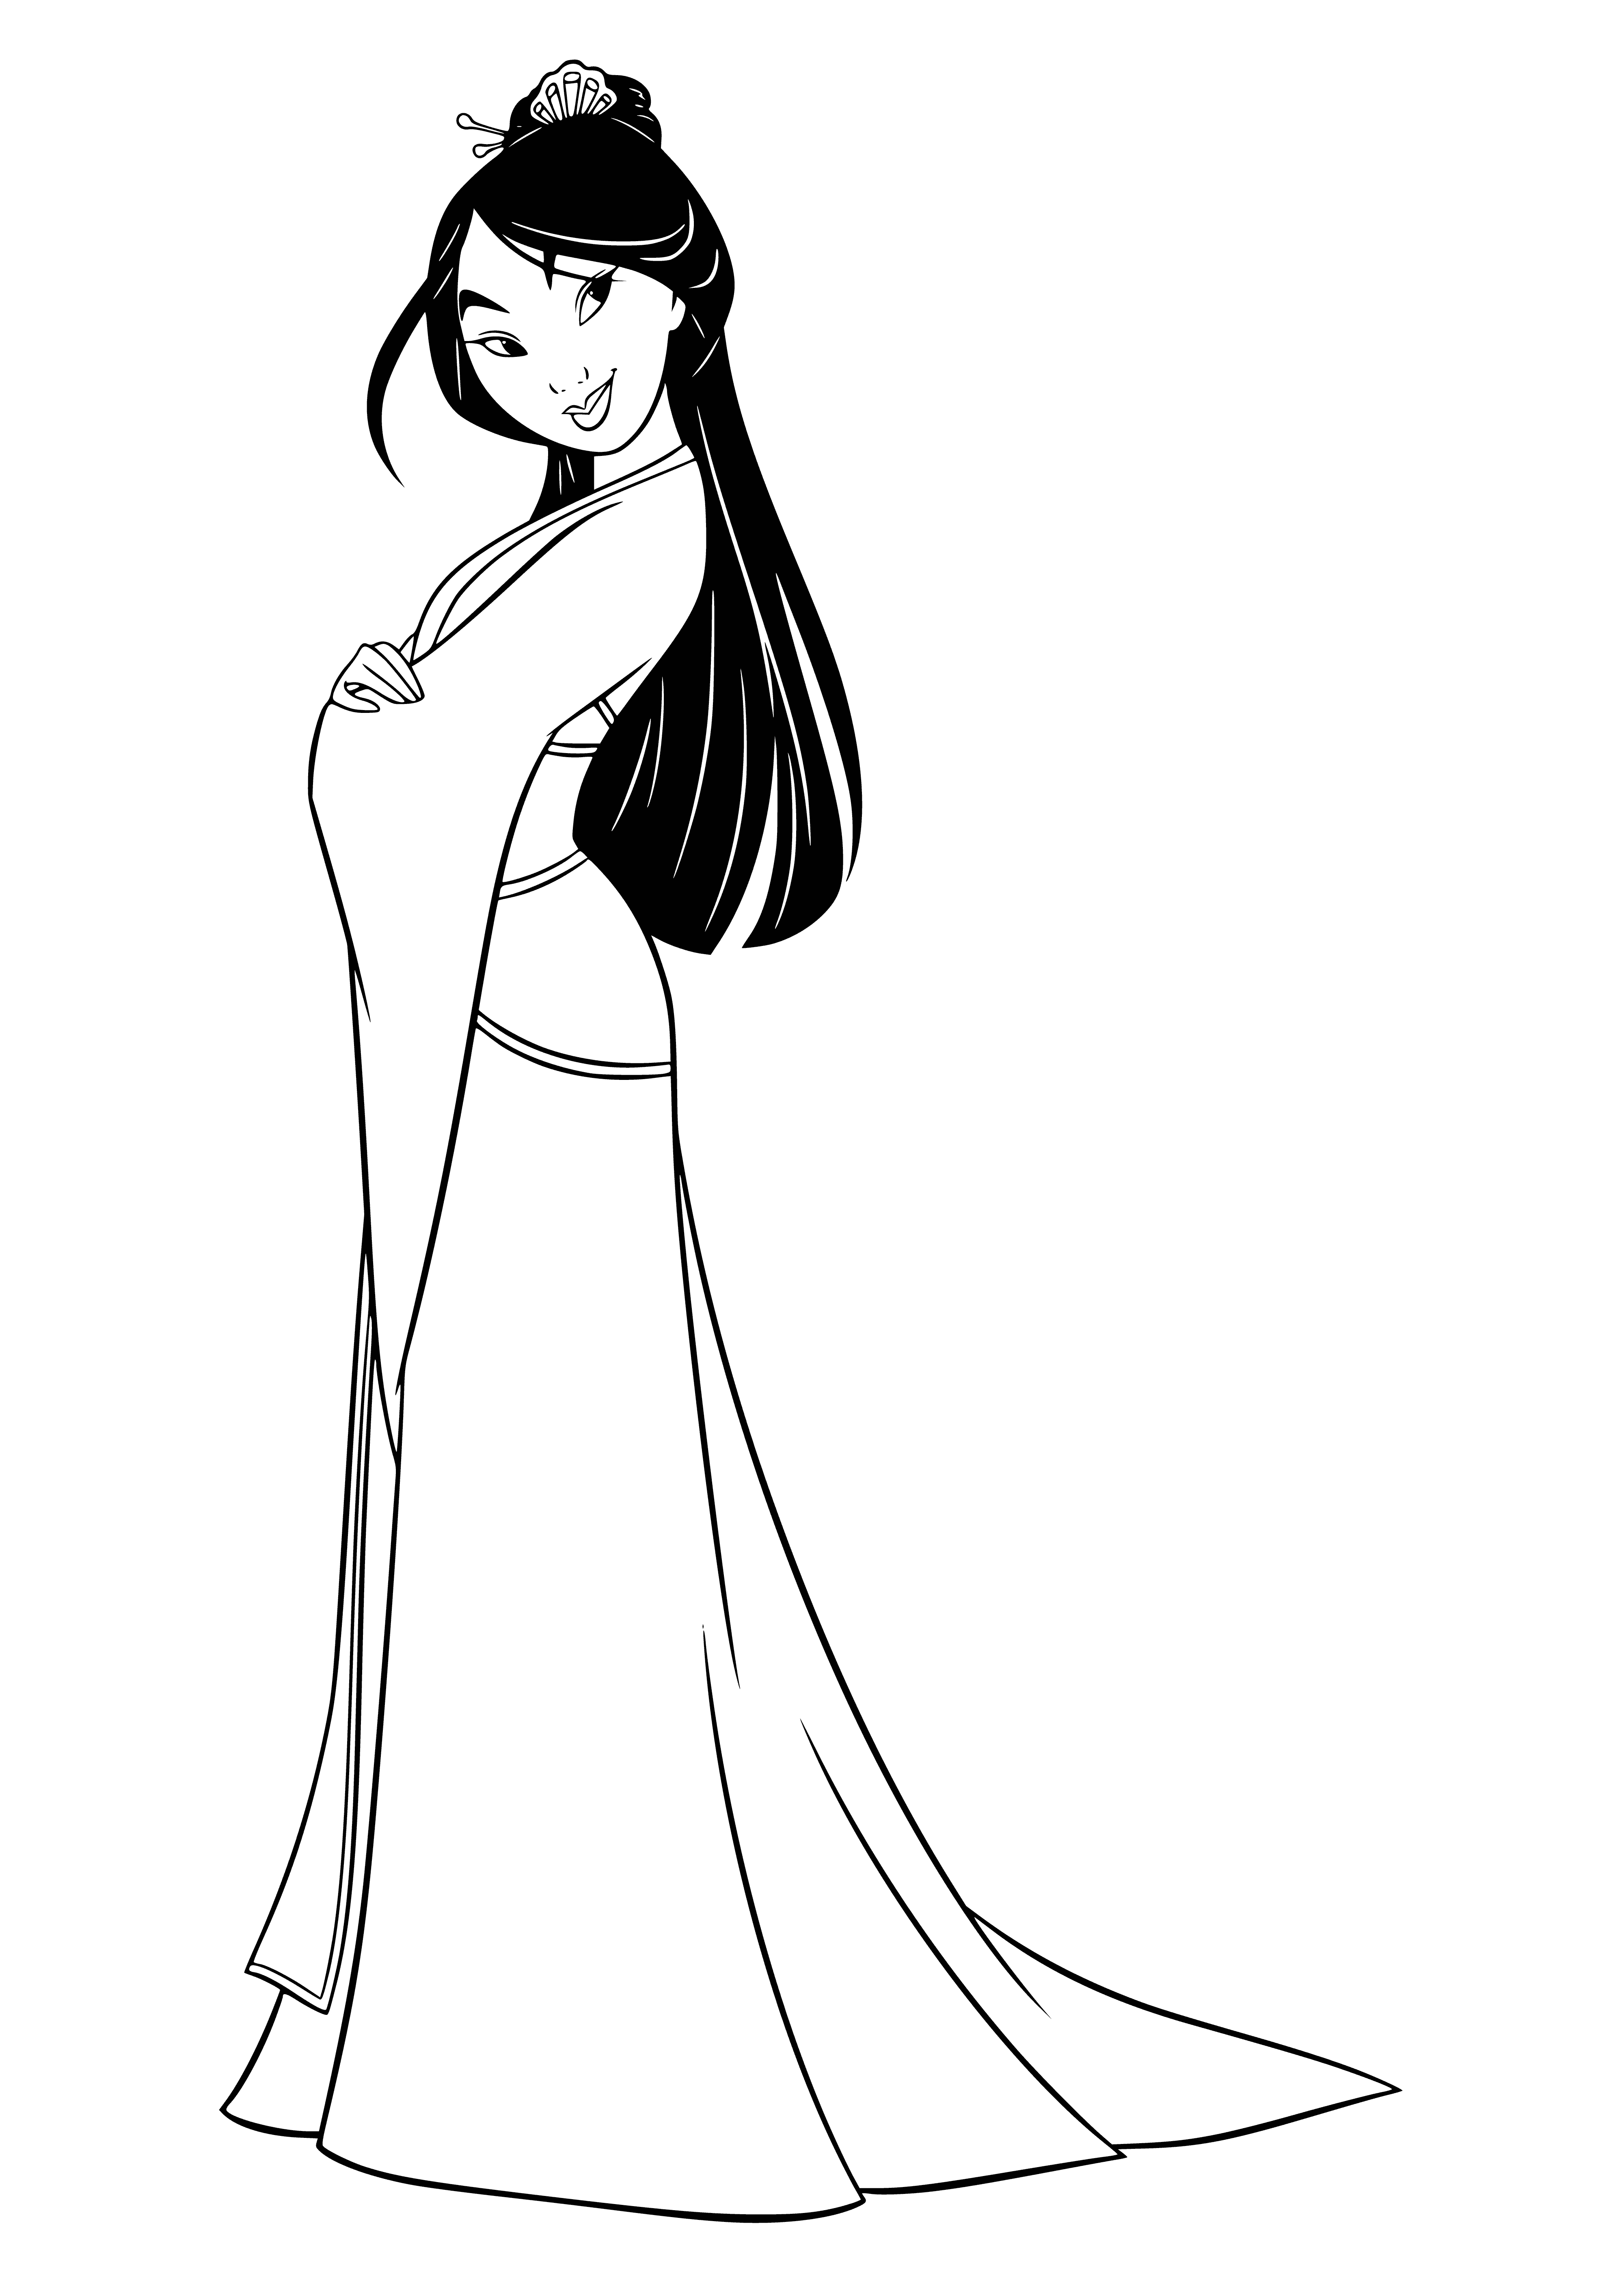 coloring page: Chinese woman wearing traditional clothing, confident expression, looking to side, hair in bun with chopsticks, map of China behind her.